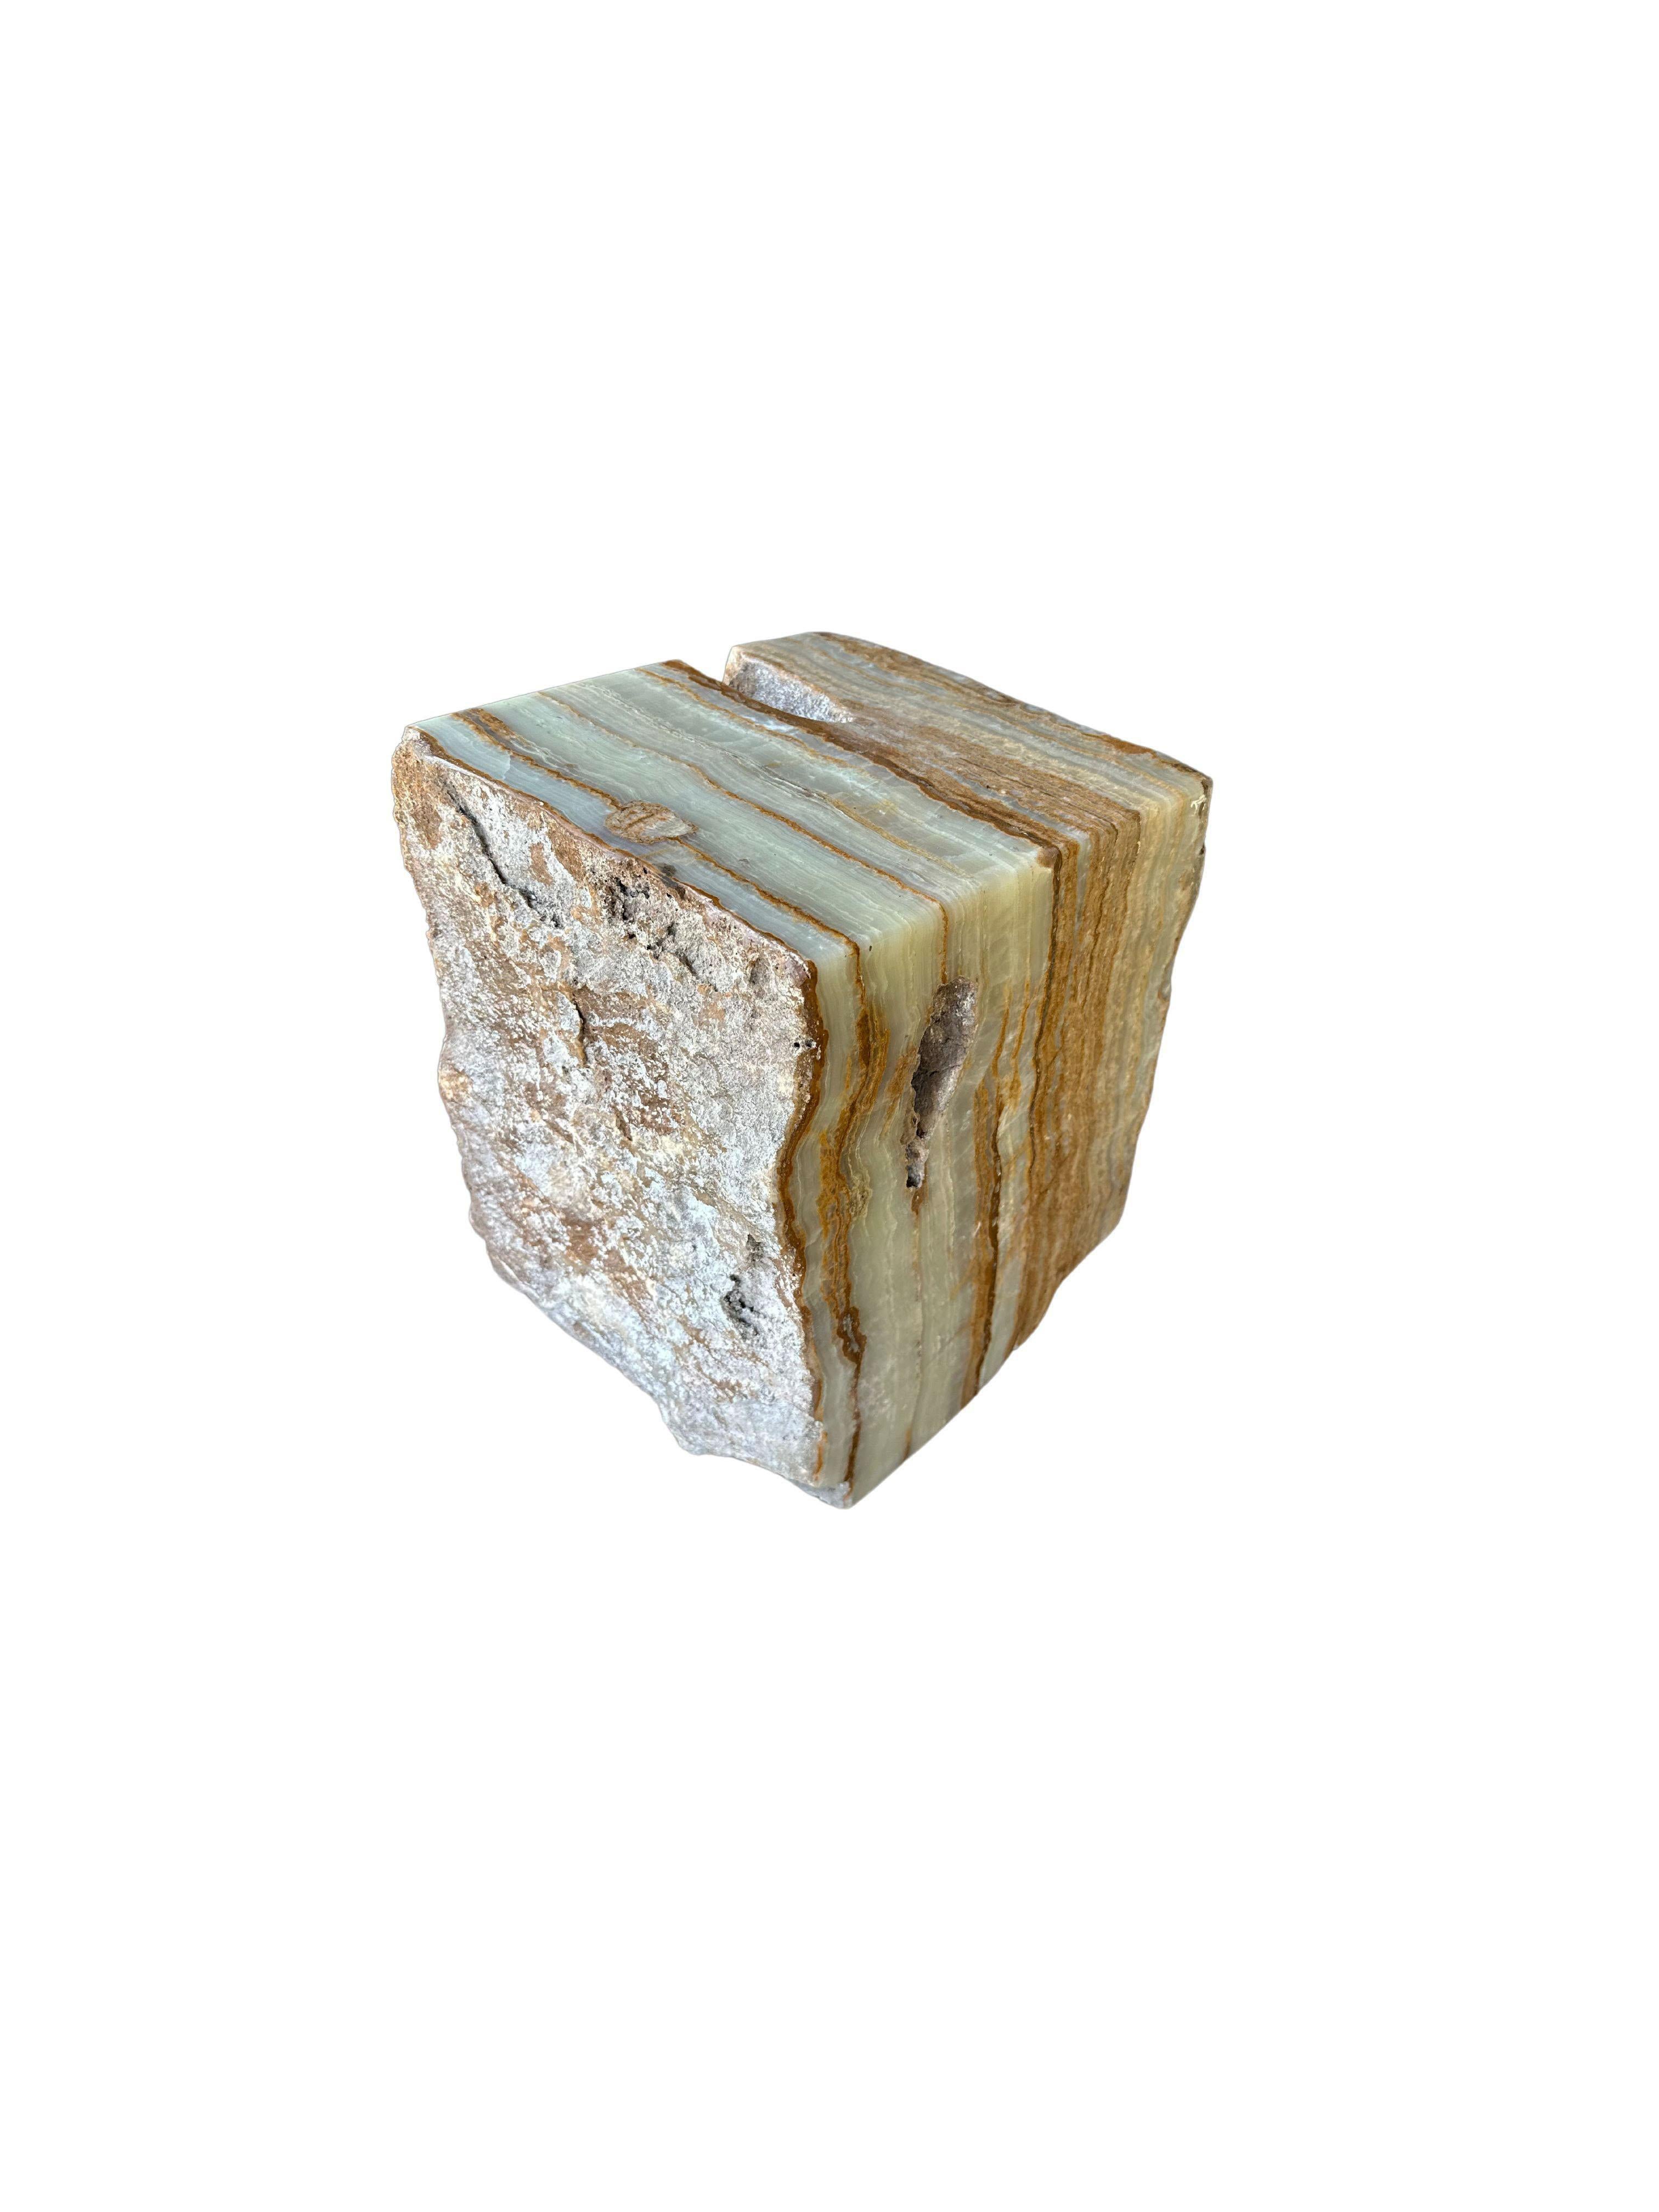 Hand-Crafted Jupiter Onyx Marble Side Table with Stunning Textures, Modern Organic For Sale